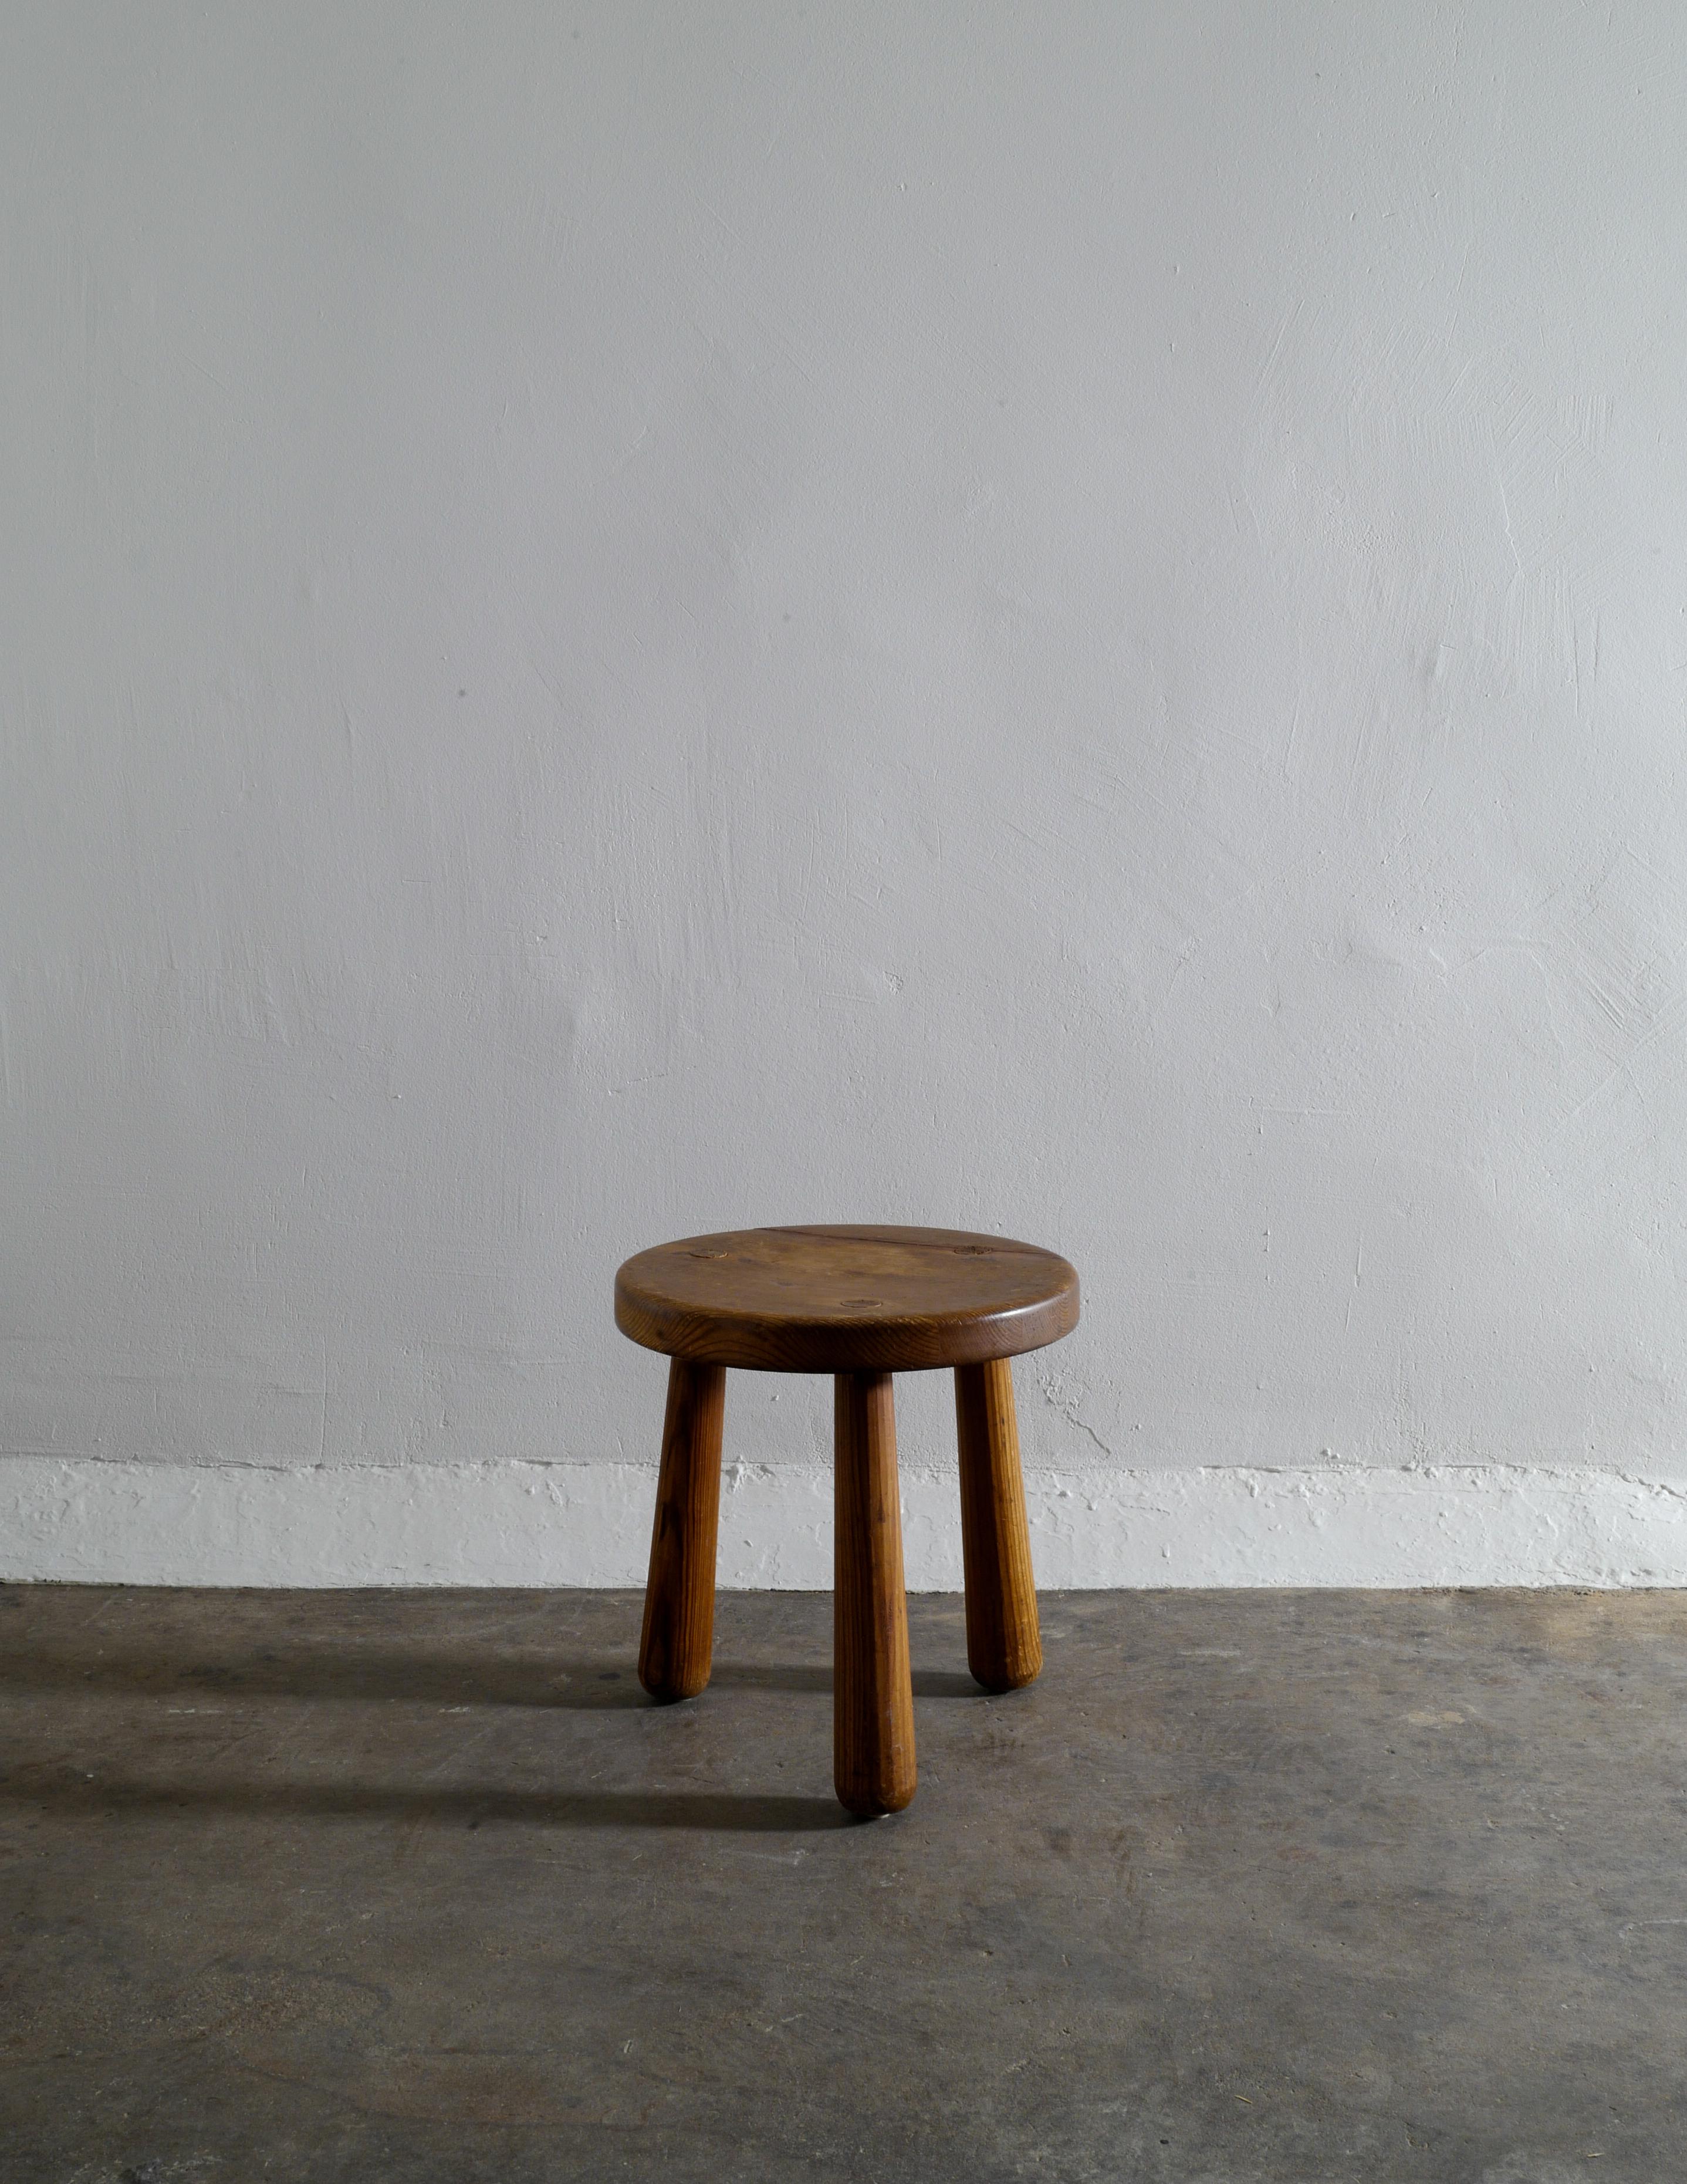 Rare stool in solid pine by Axel Einar Hjorth for Nordiska Kompaniet in Stockholm, 1930s. This stool comes from the original owner family and could have been lowered at some time in the past by ca 4 cm or it was made this way. The stool has the